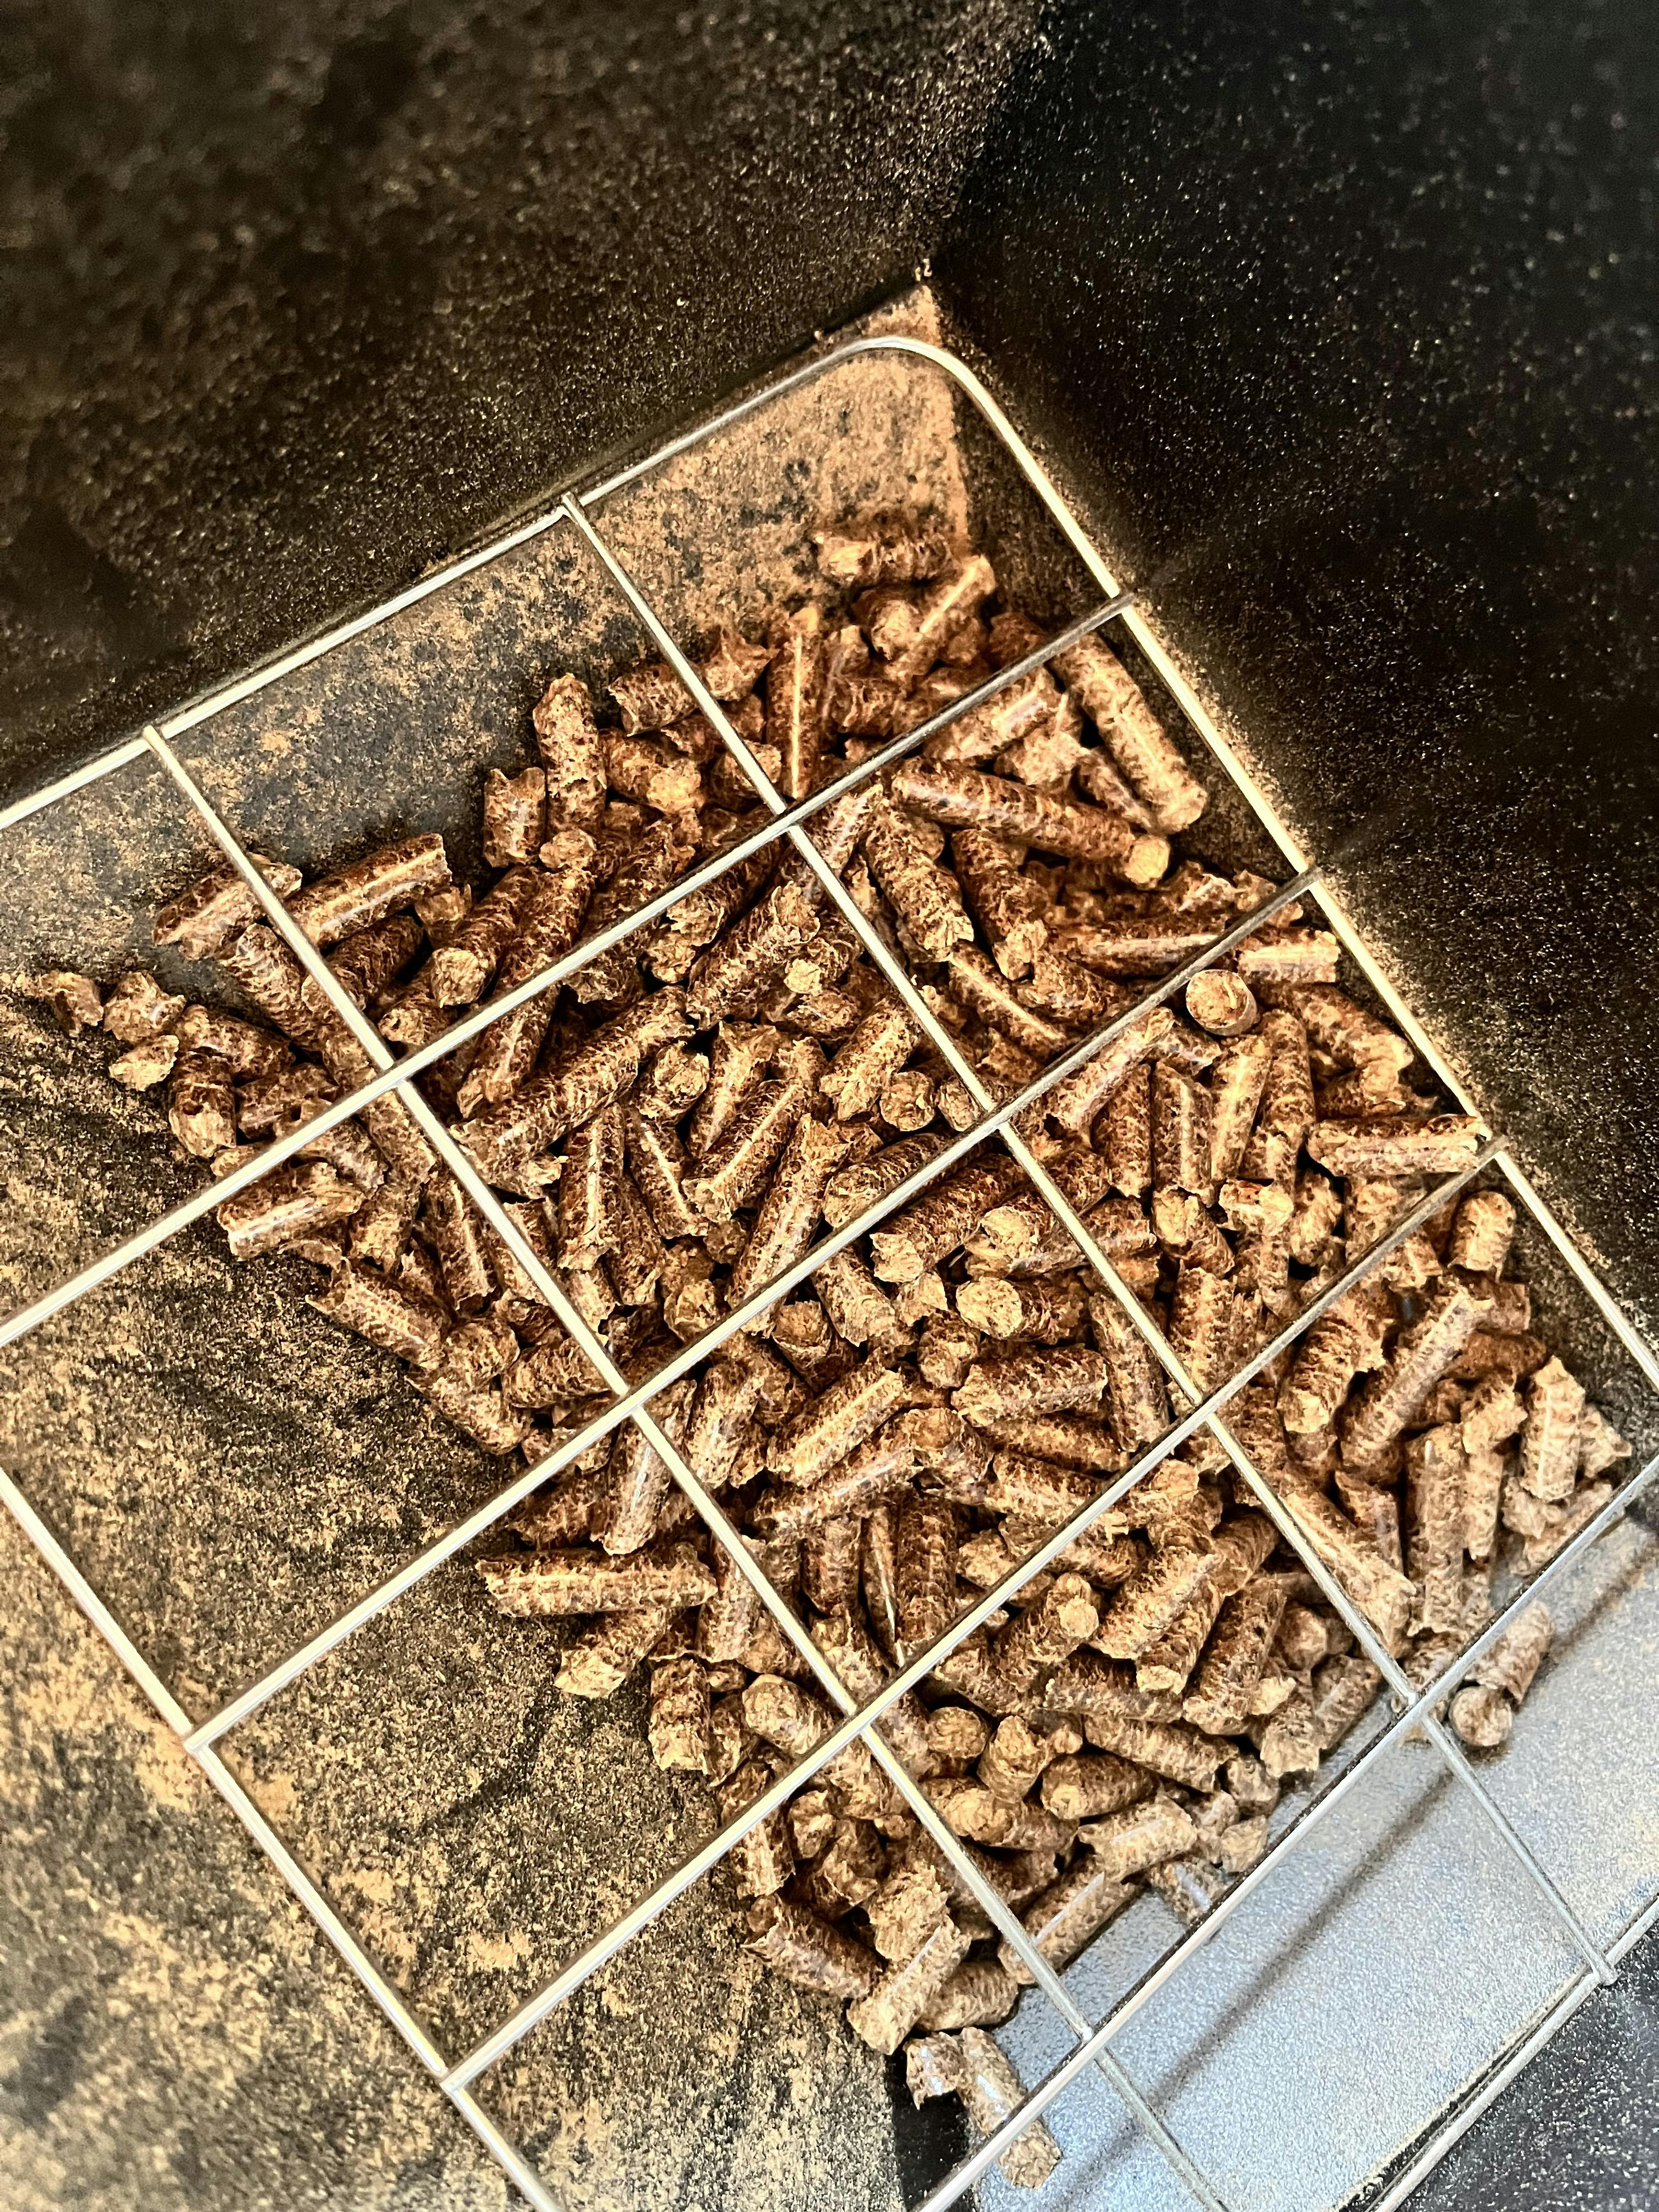 Hopper filled with pellets on a pellet grill.